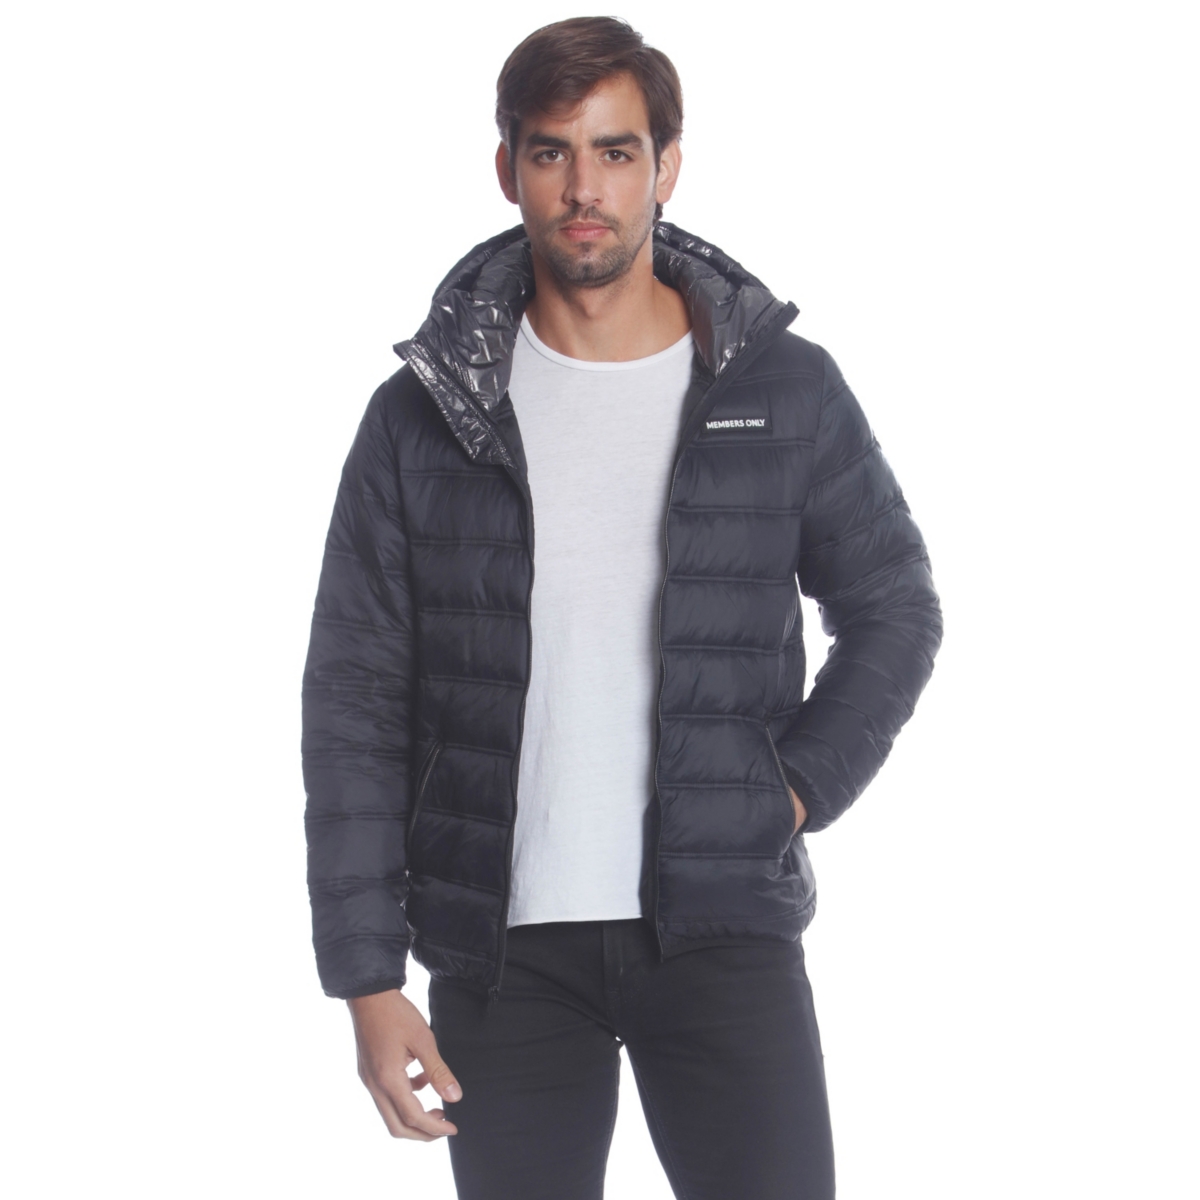 MEMBERS ONLY MEN'S SOLID PACKABLE JACKET